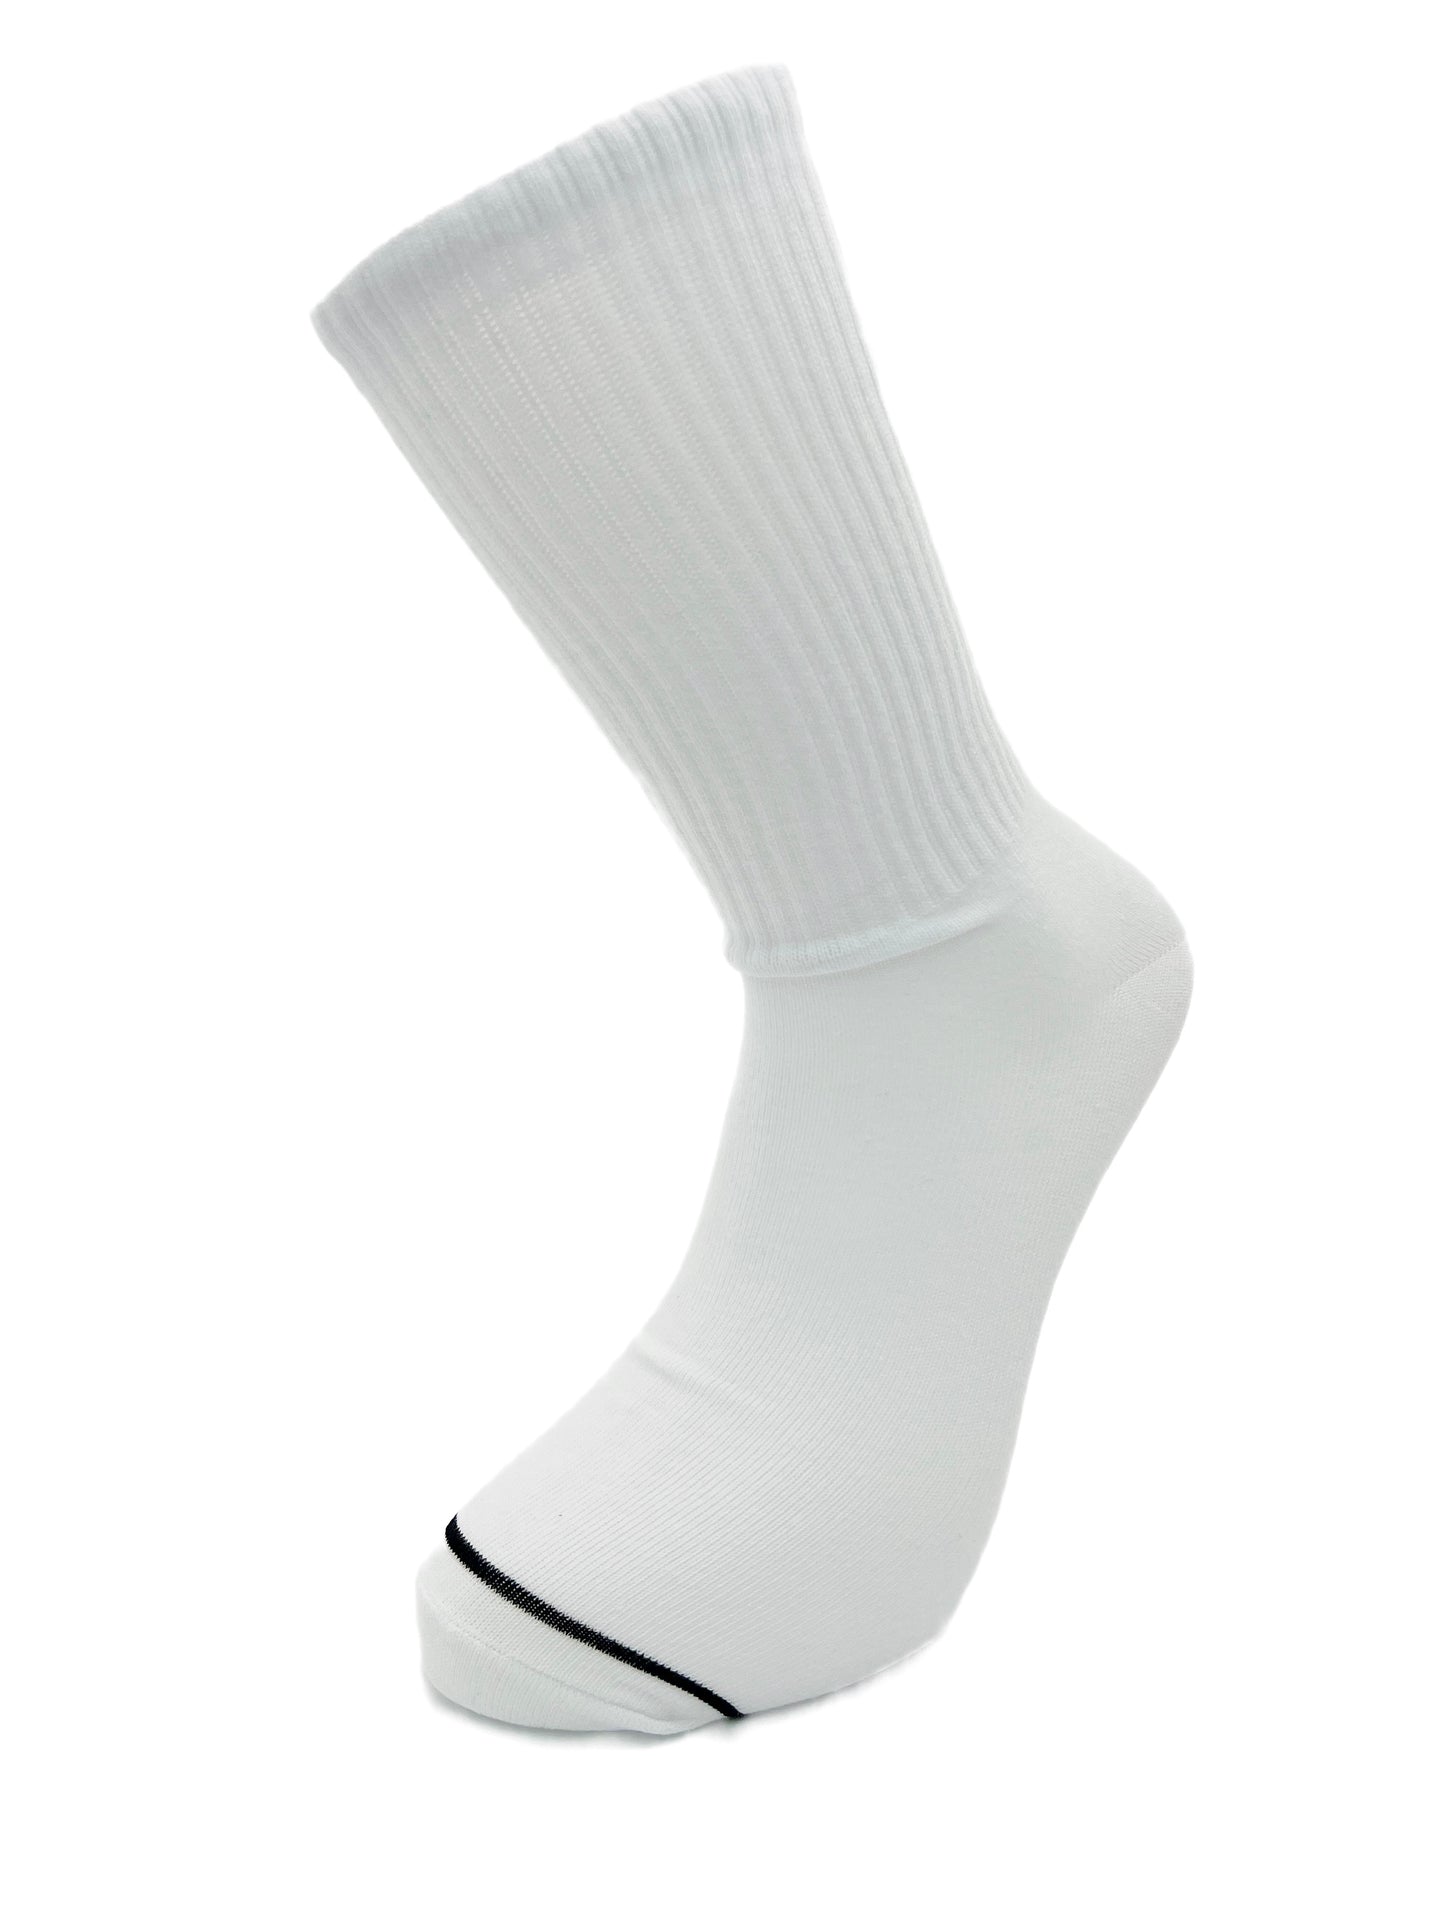 White unisex, fashionable, crew, casual and sports socks - 3 or 6 pairs pack